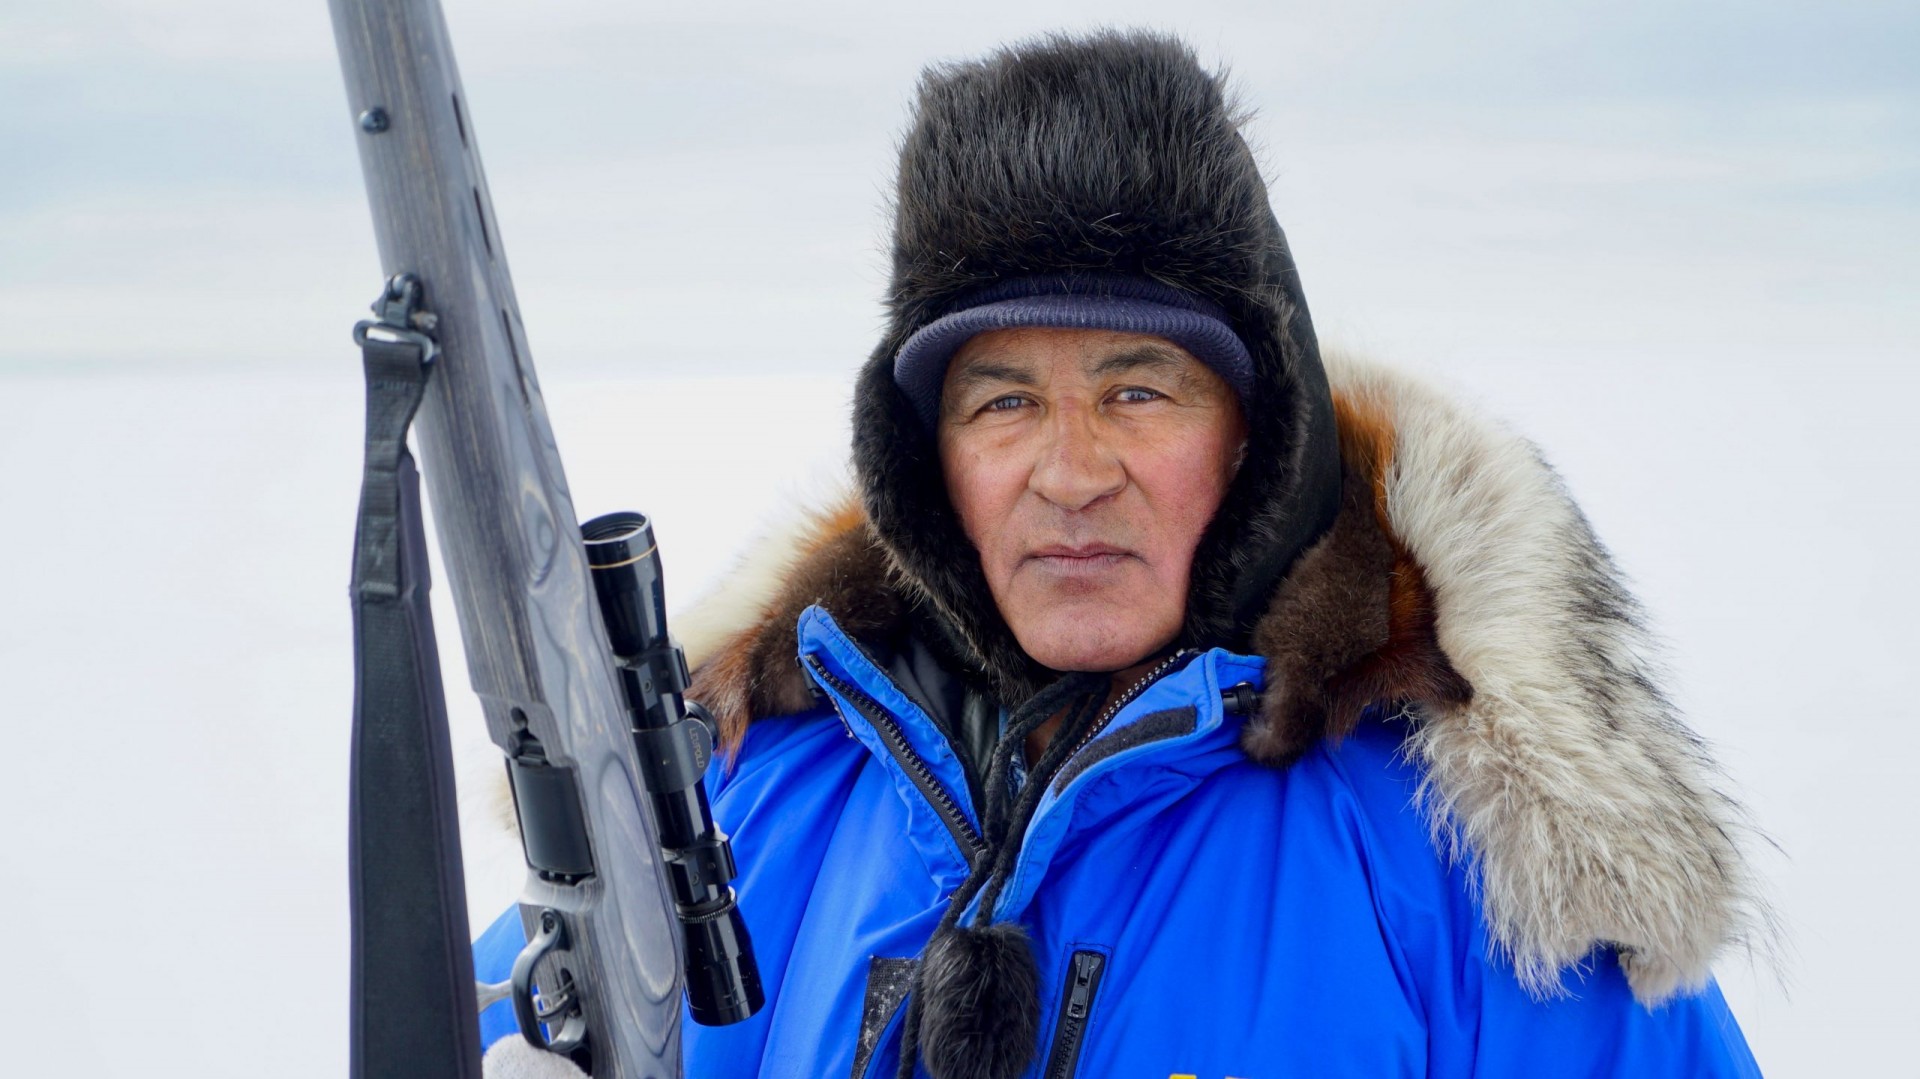 new film explores combining indigenous knowledge and western science to understand waning arctic sea ice